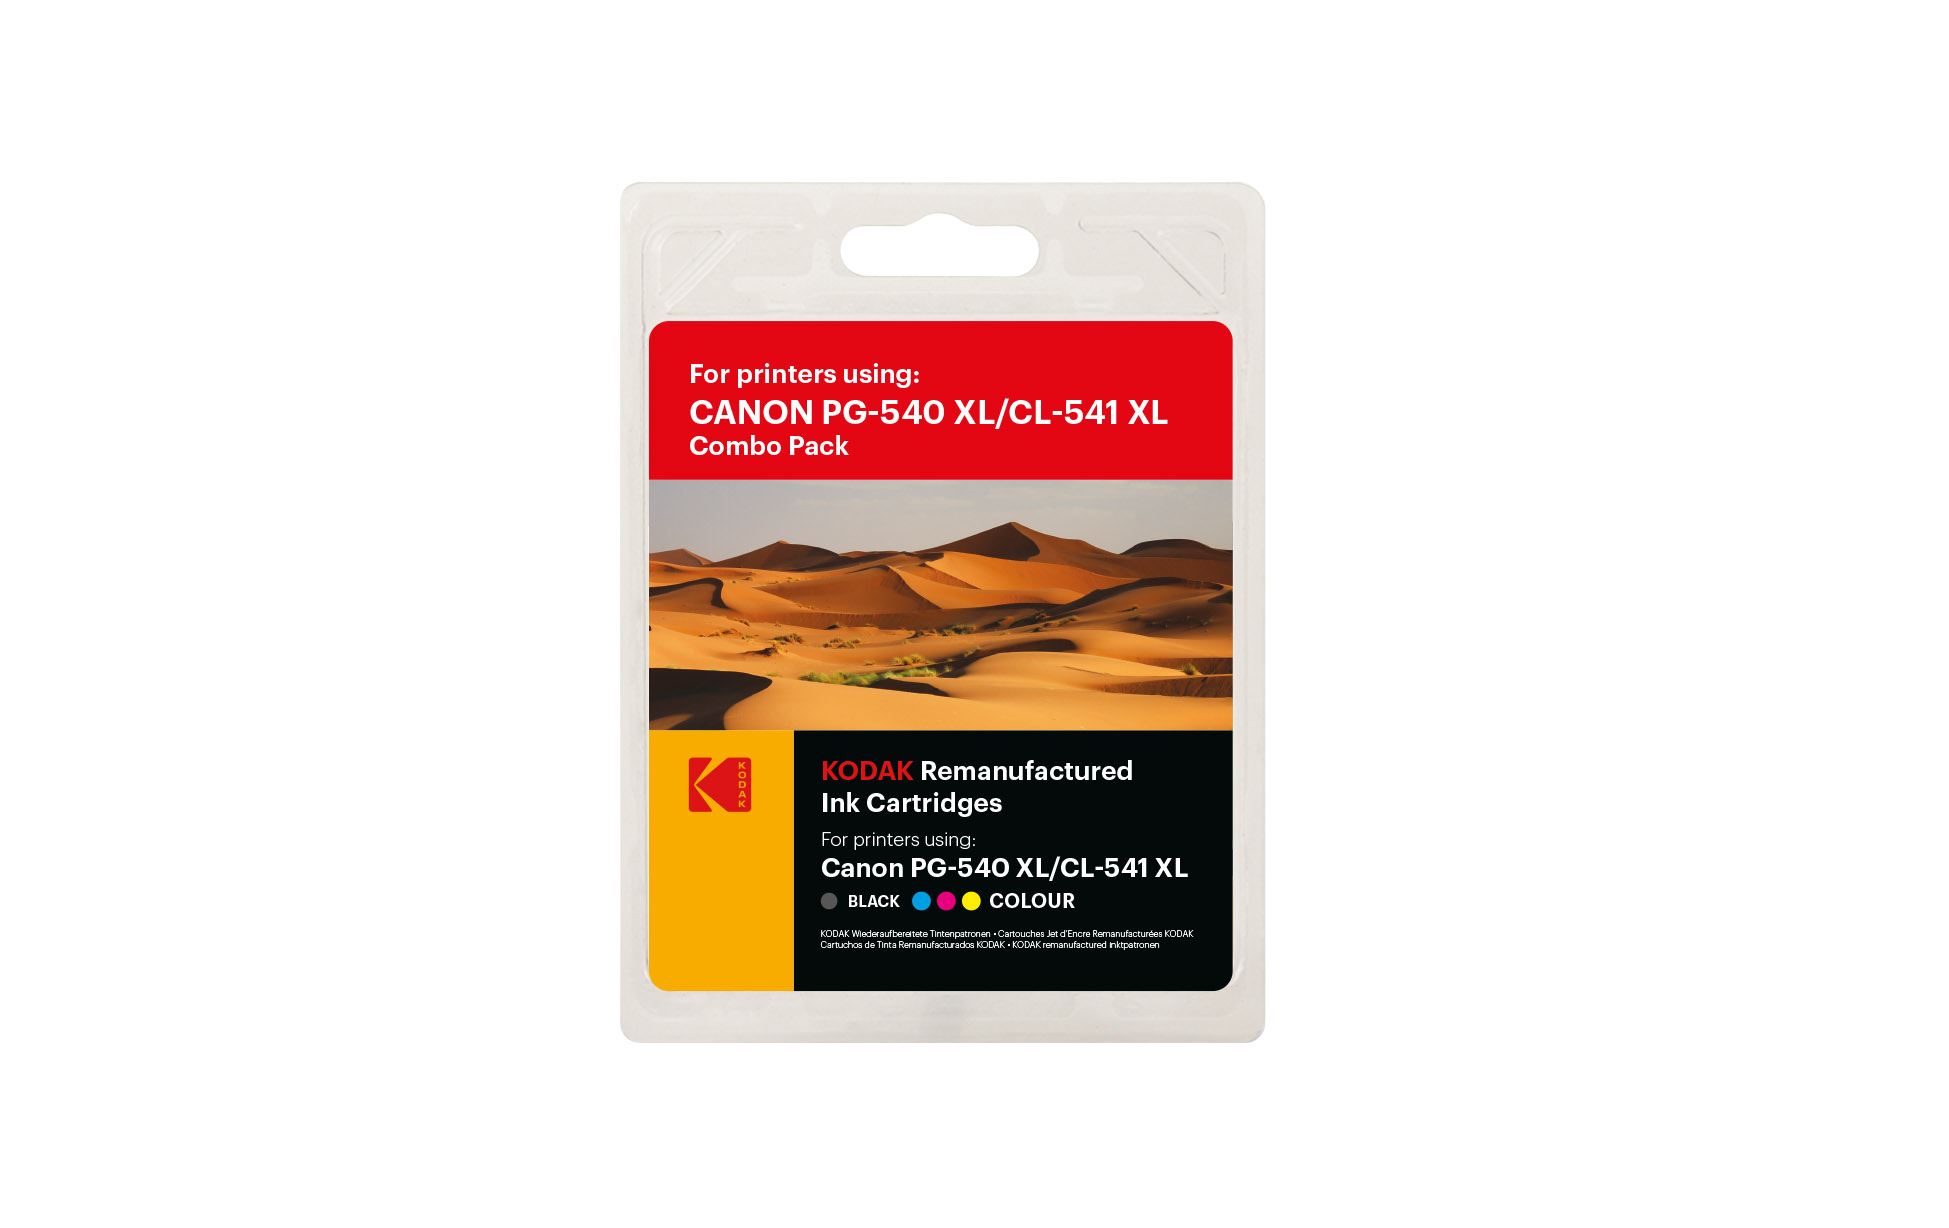 Buy Canon PG-540 XL / CL-541 XL Photo Value Pack from £48.95